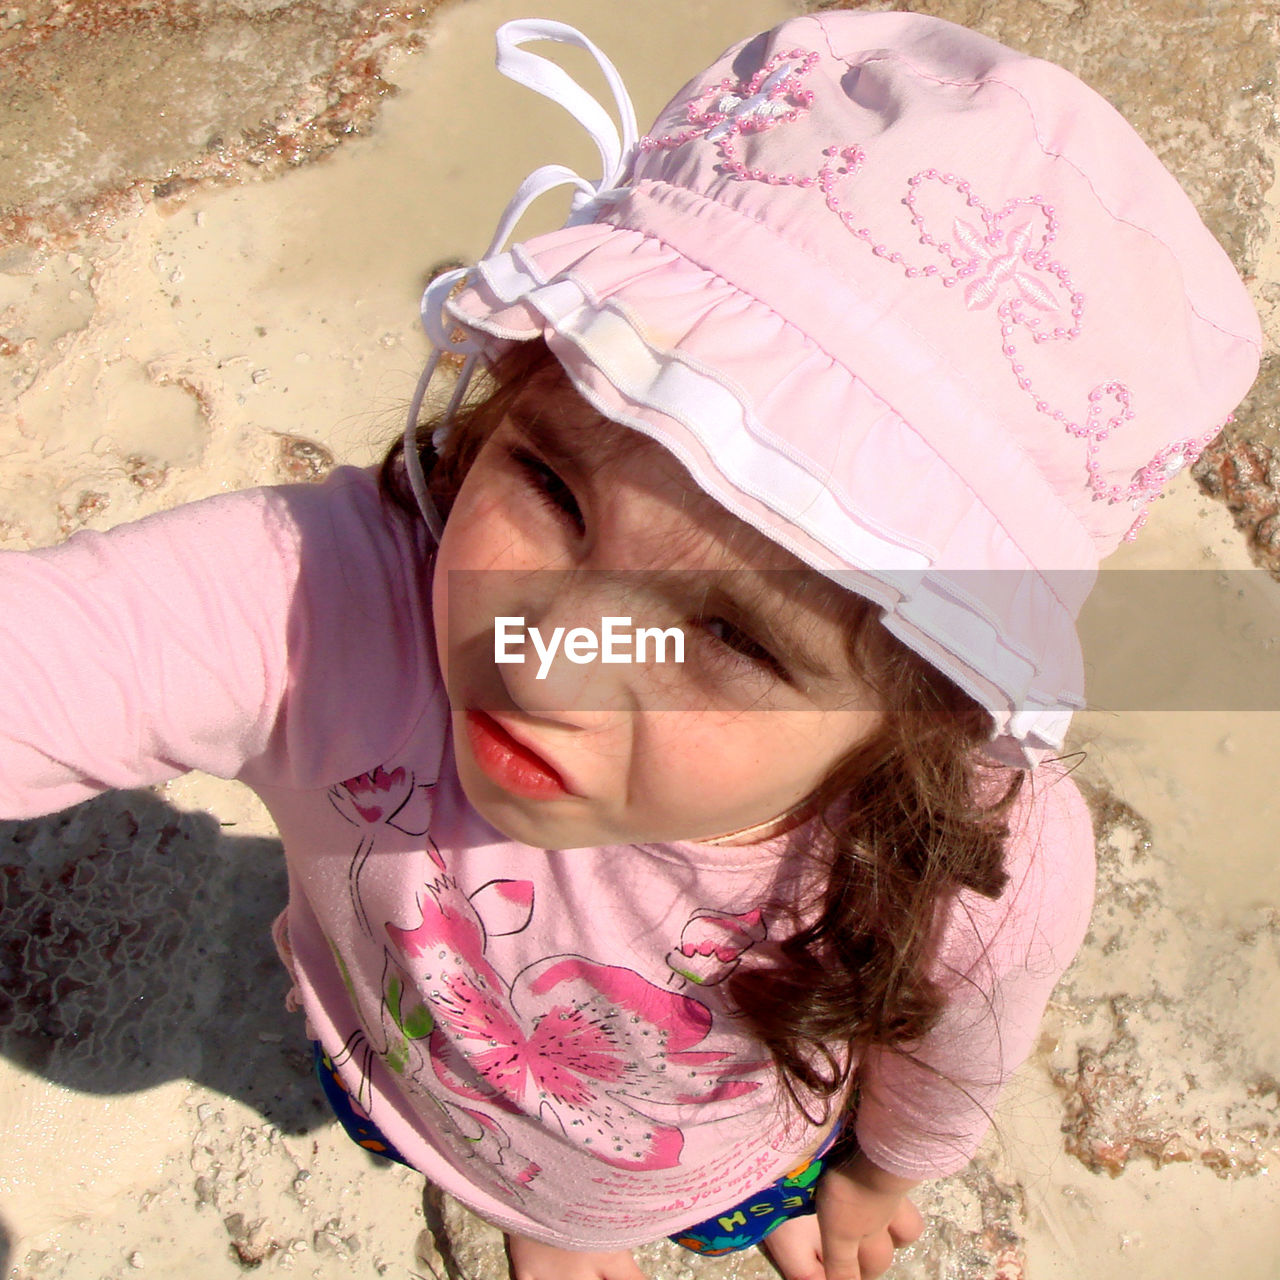 CLOSE-UP PORTRAIT OF GIRL STANDING ON SAND